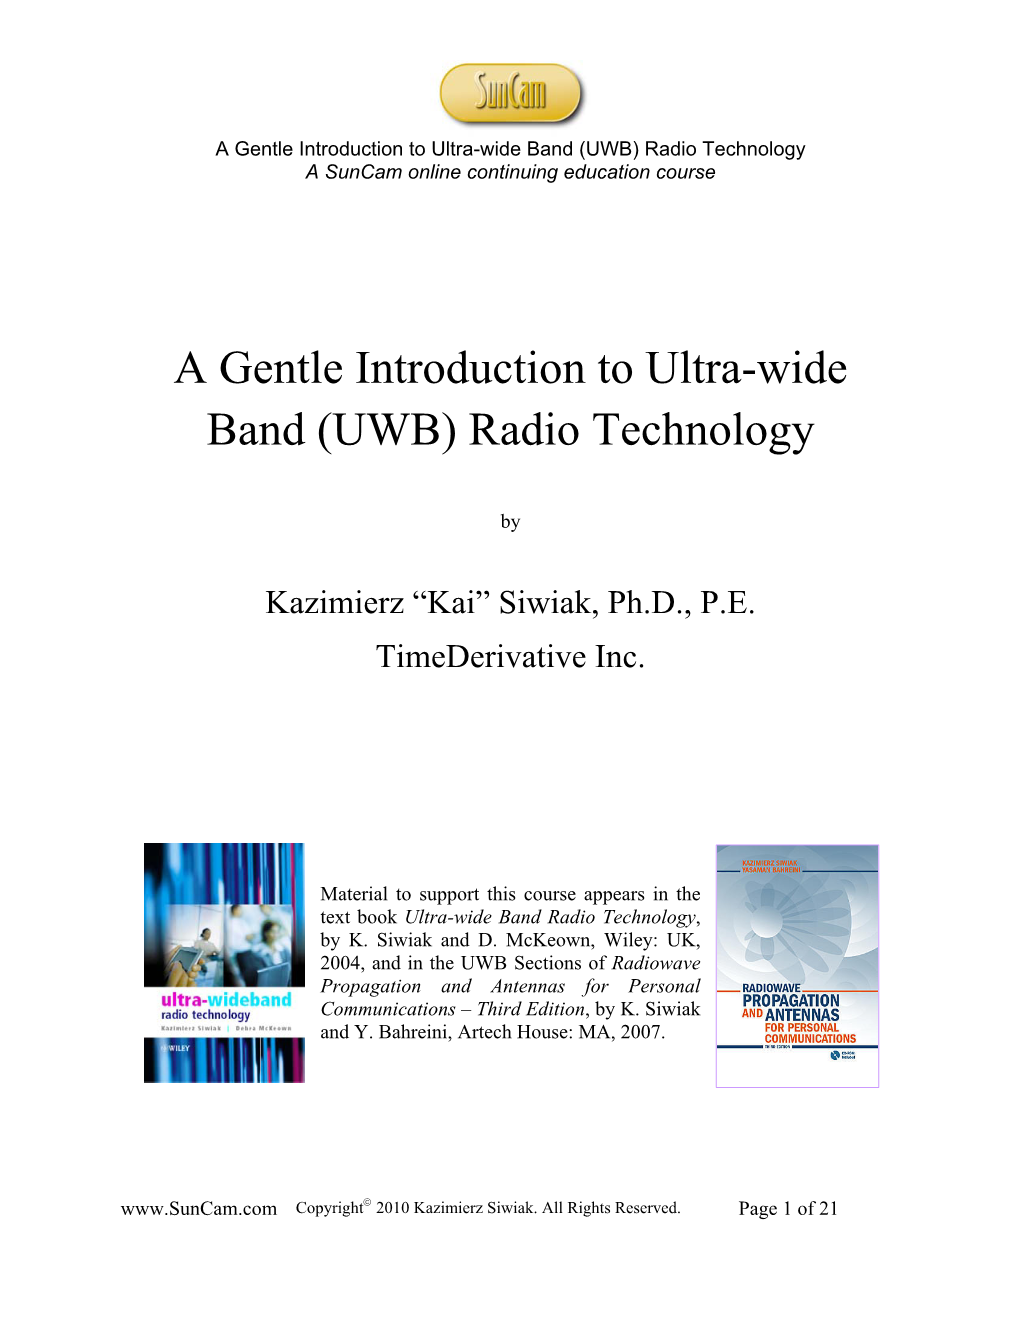 A Gentle Introduction to Ultra-Wide Band (UWB) Radio Technology a Suncam Online Continuing Education Course